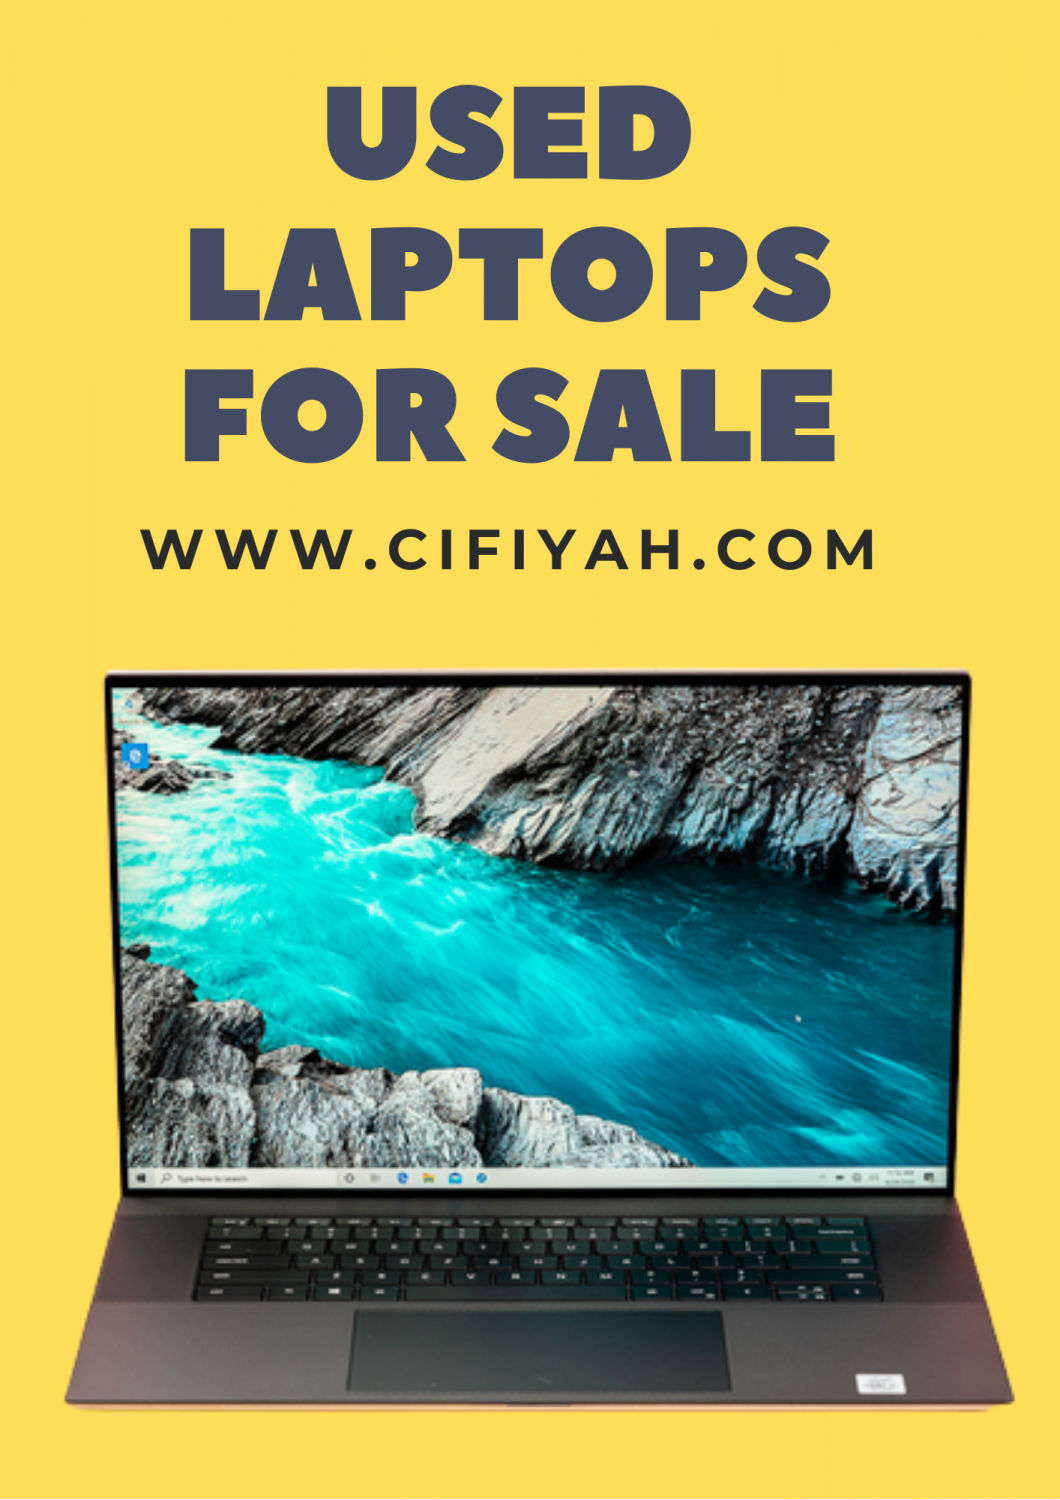 second hand laptops for sale on cifiyah.com